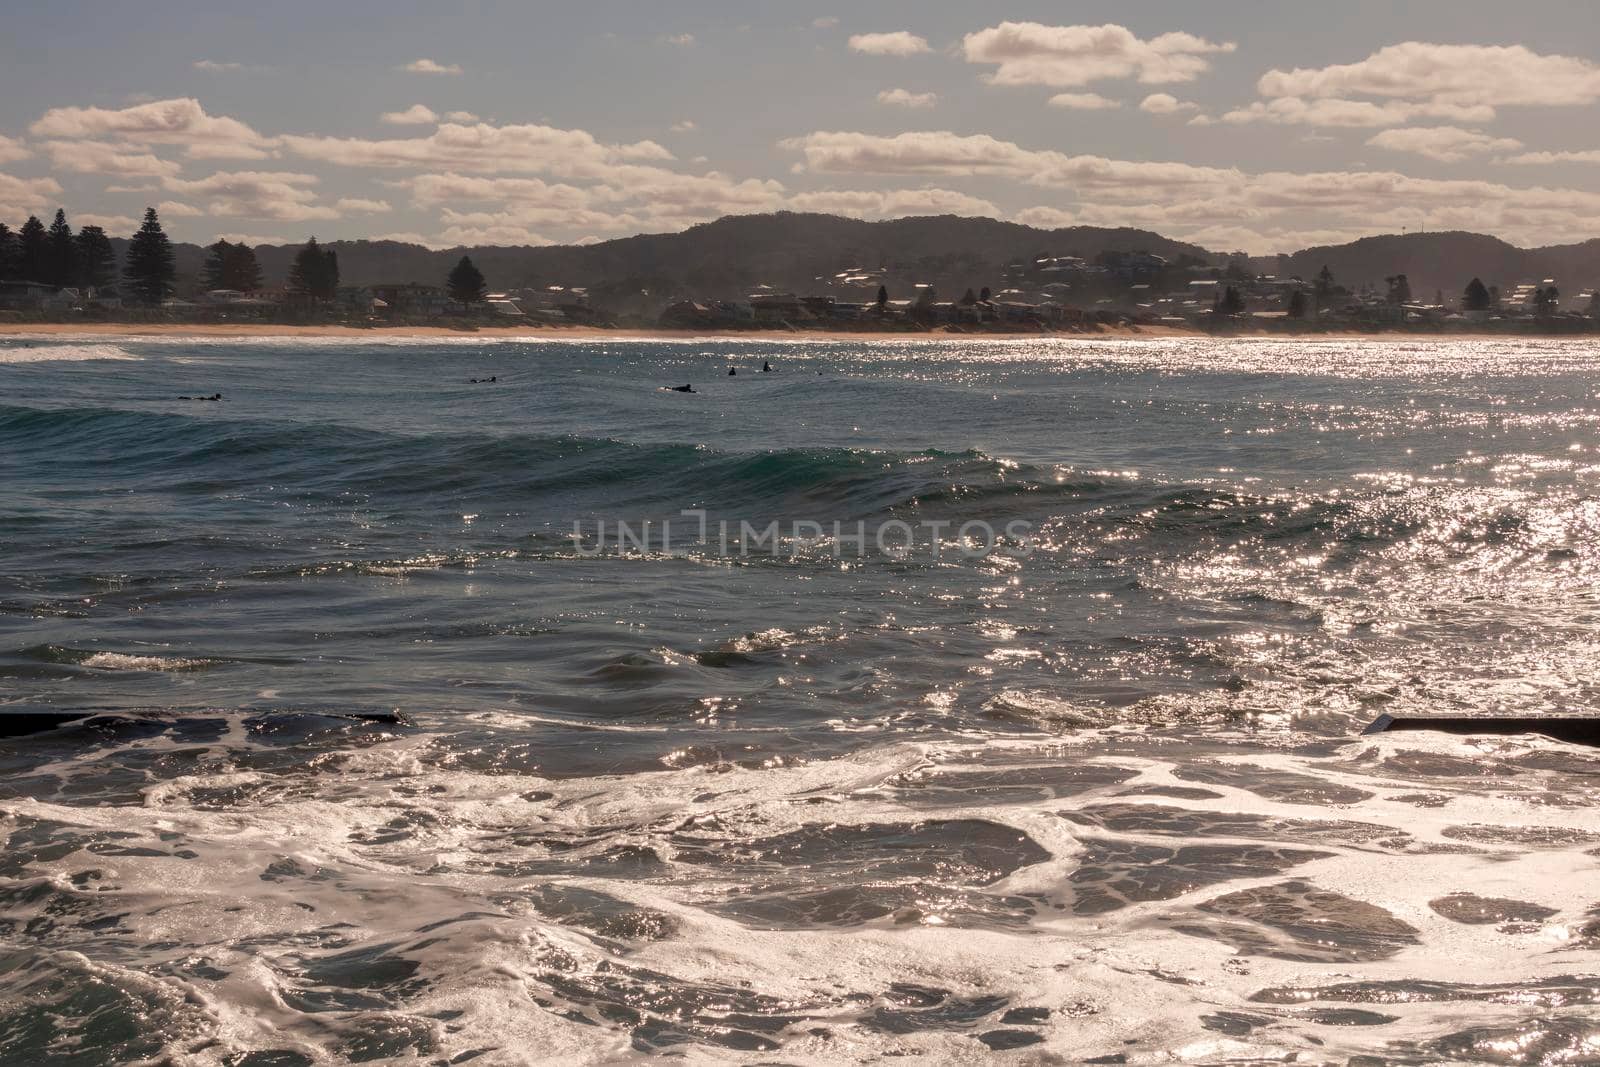 Photograph of Terrigal Beach on the Central Coast in Australia by WittkePhotos